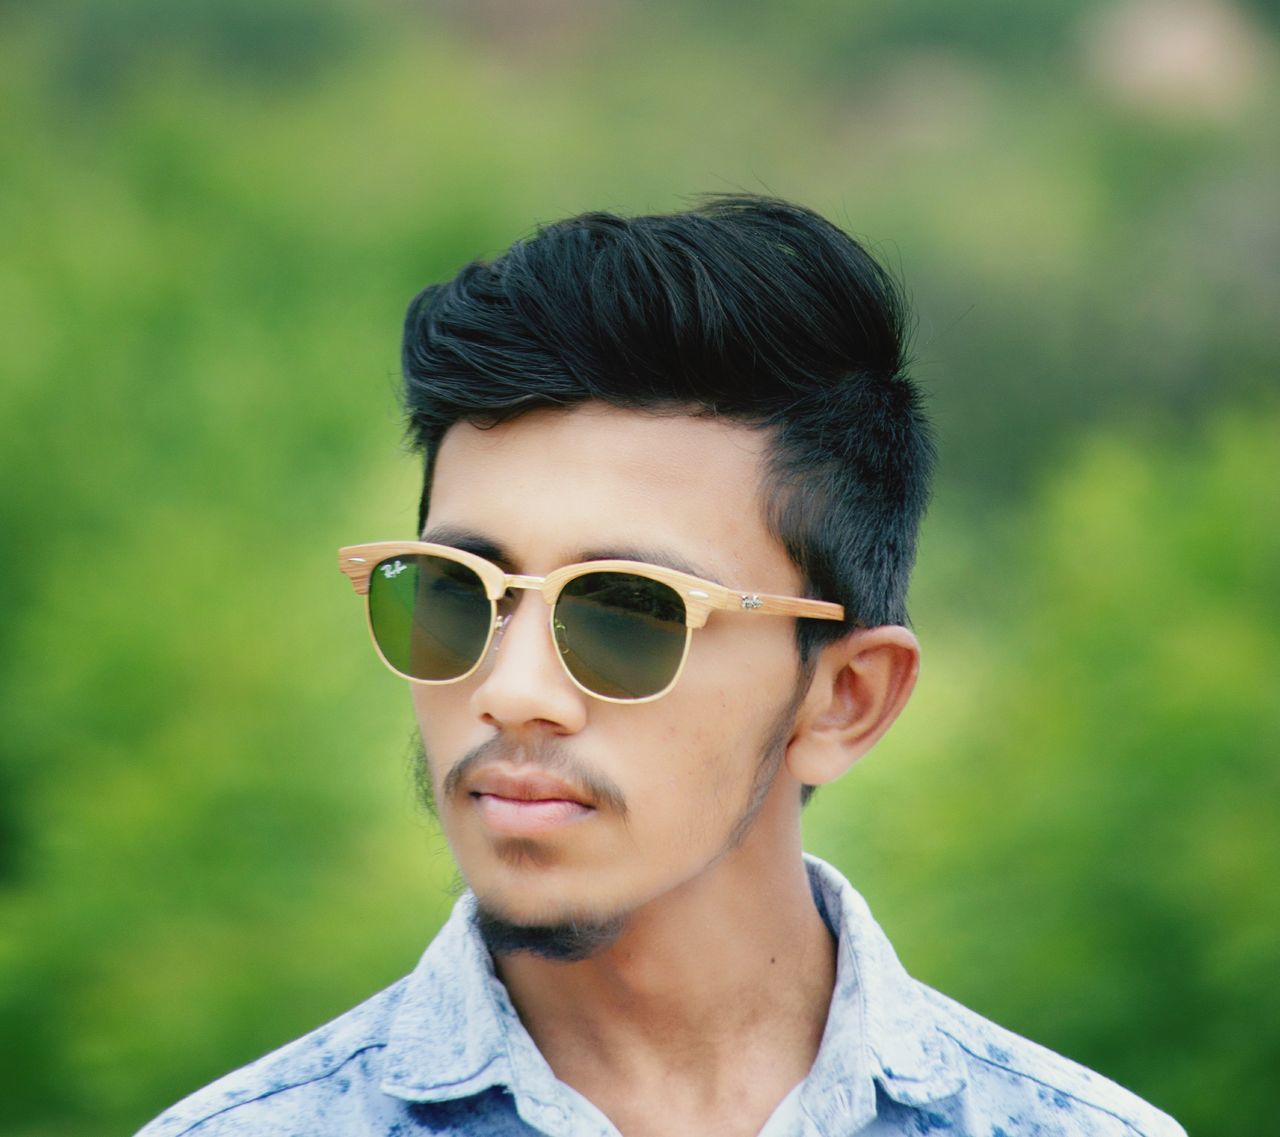 PORTRAIT OF HANDSOME YOUNG MAN WEARING SUNGLASSES